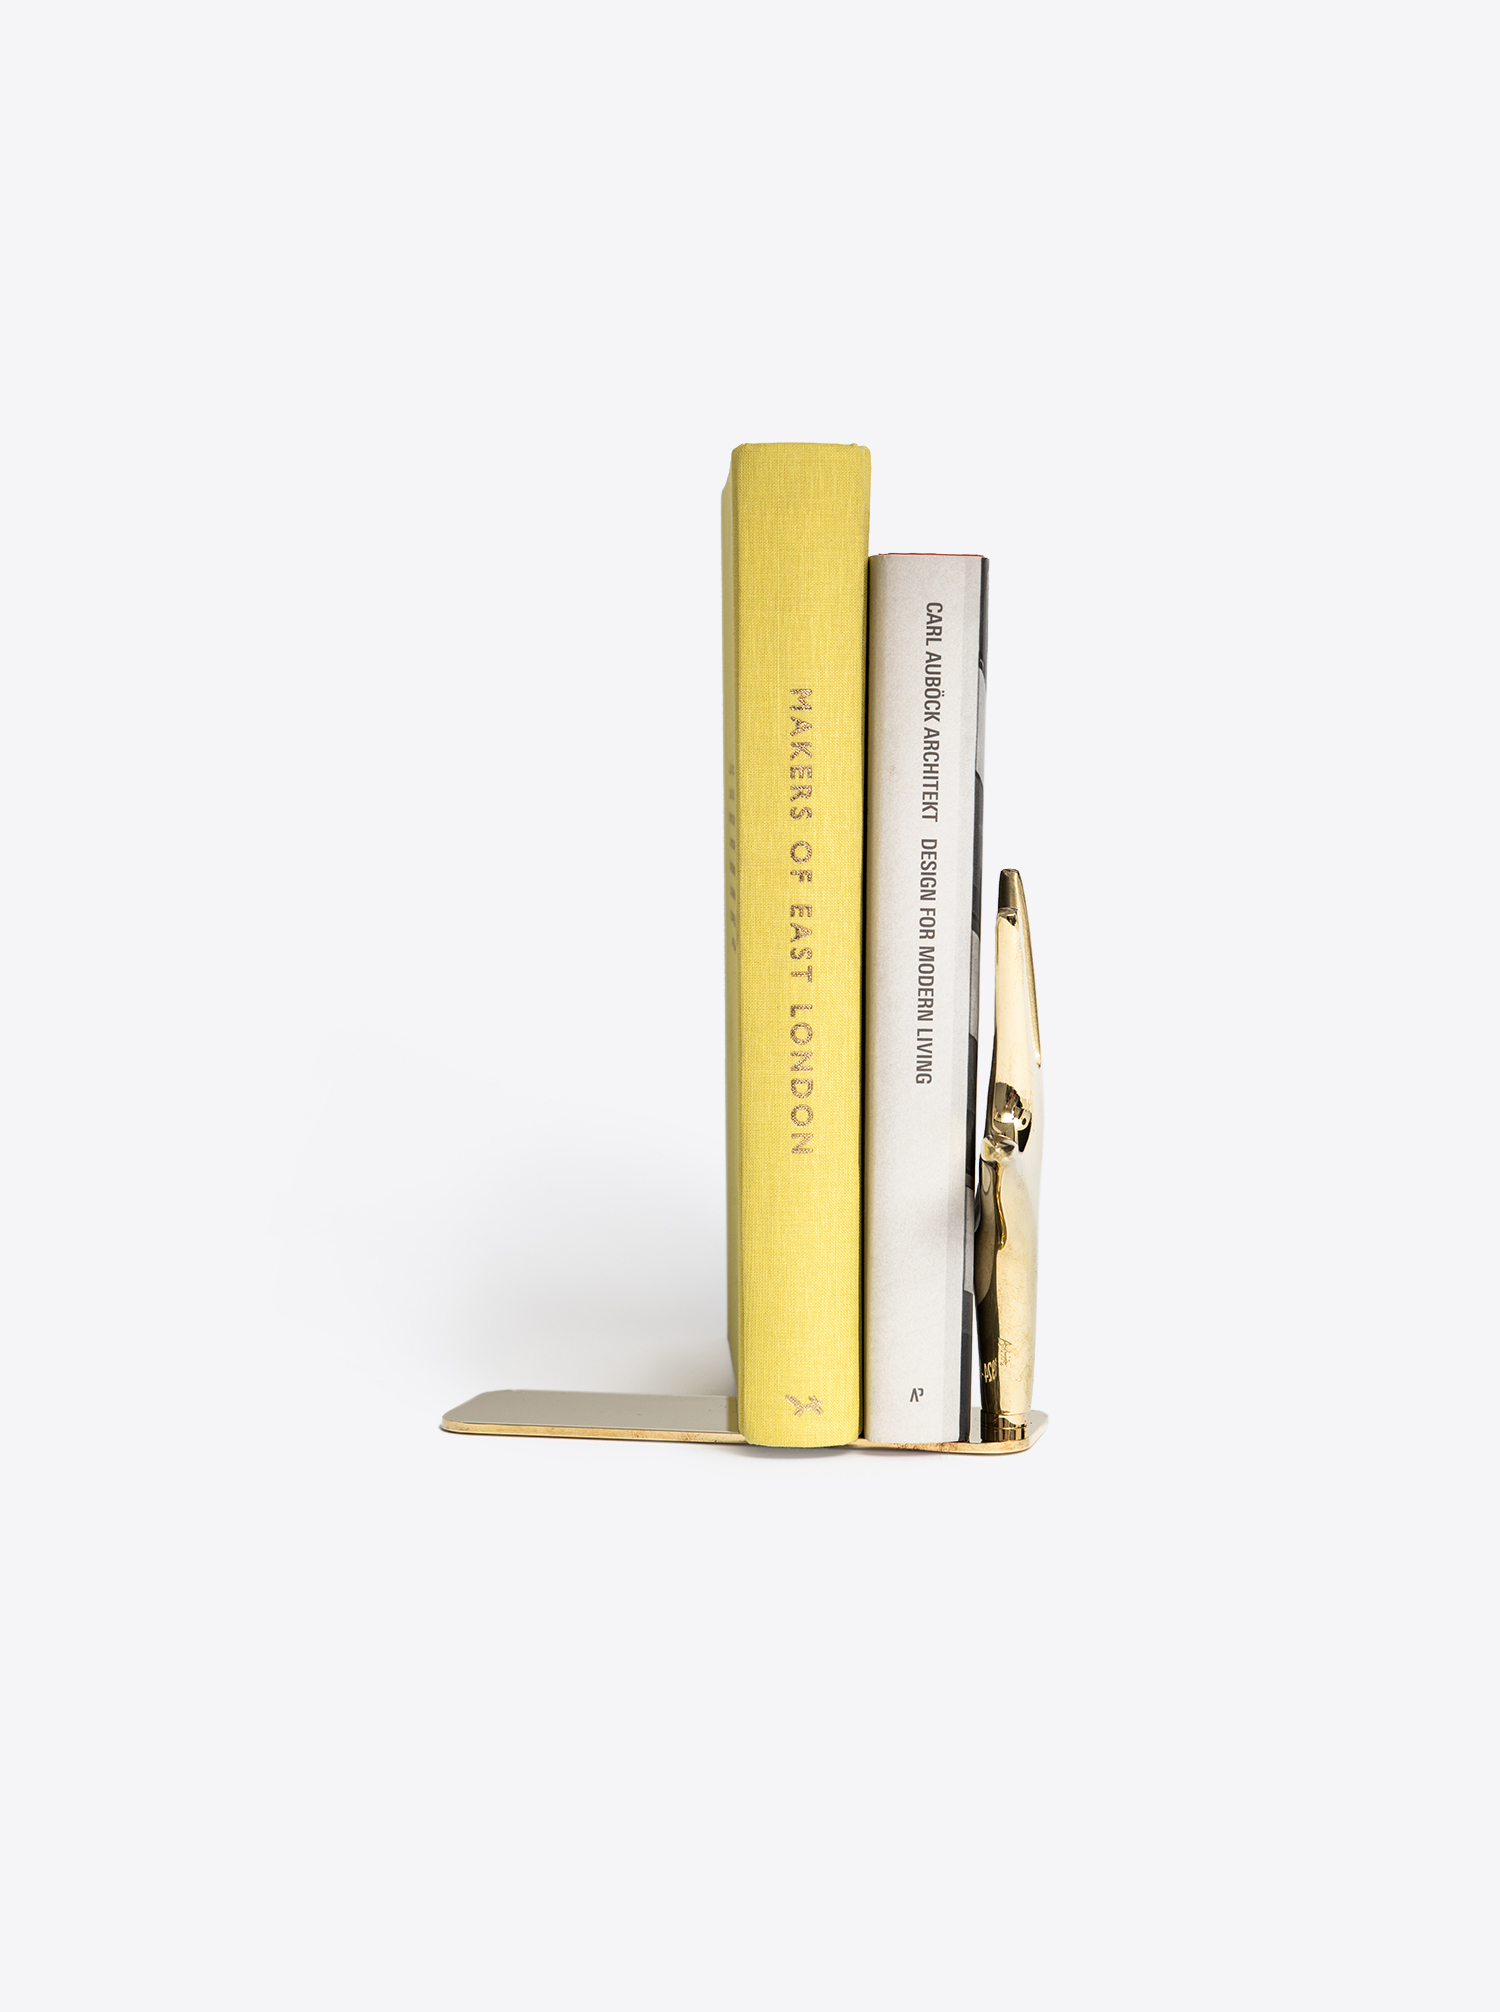 Bookend &quot;Hand&quot; 360 ° rotatable I polished brass